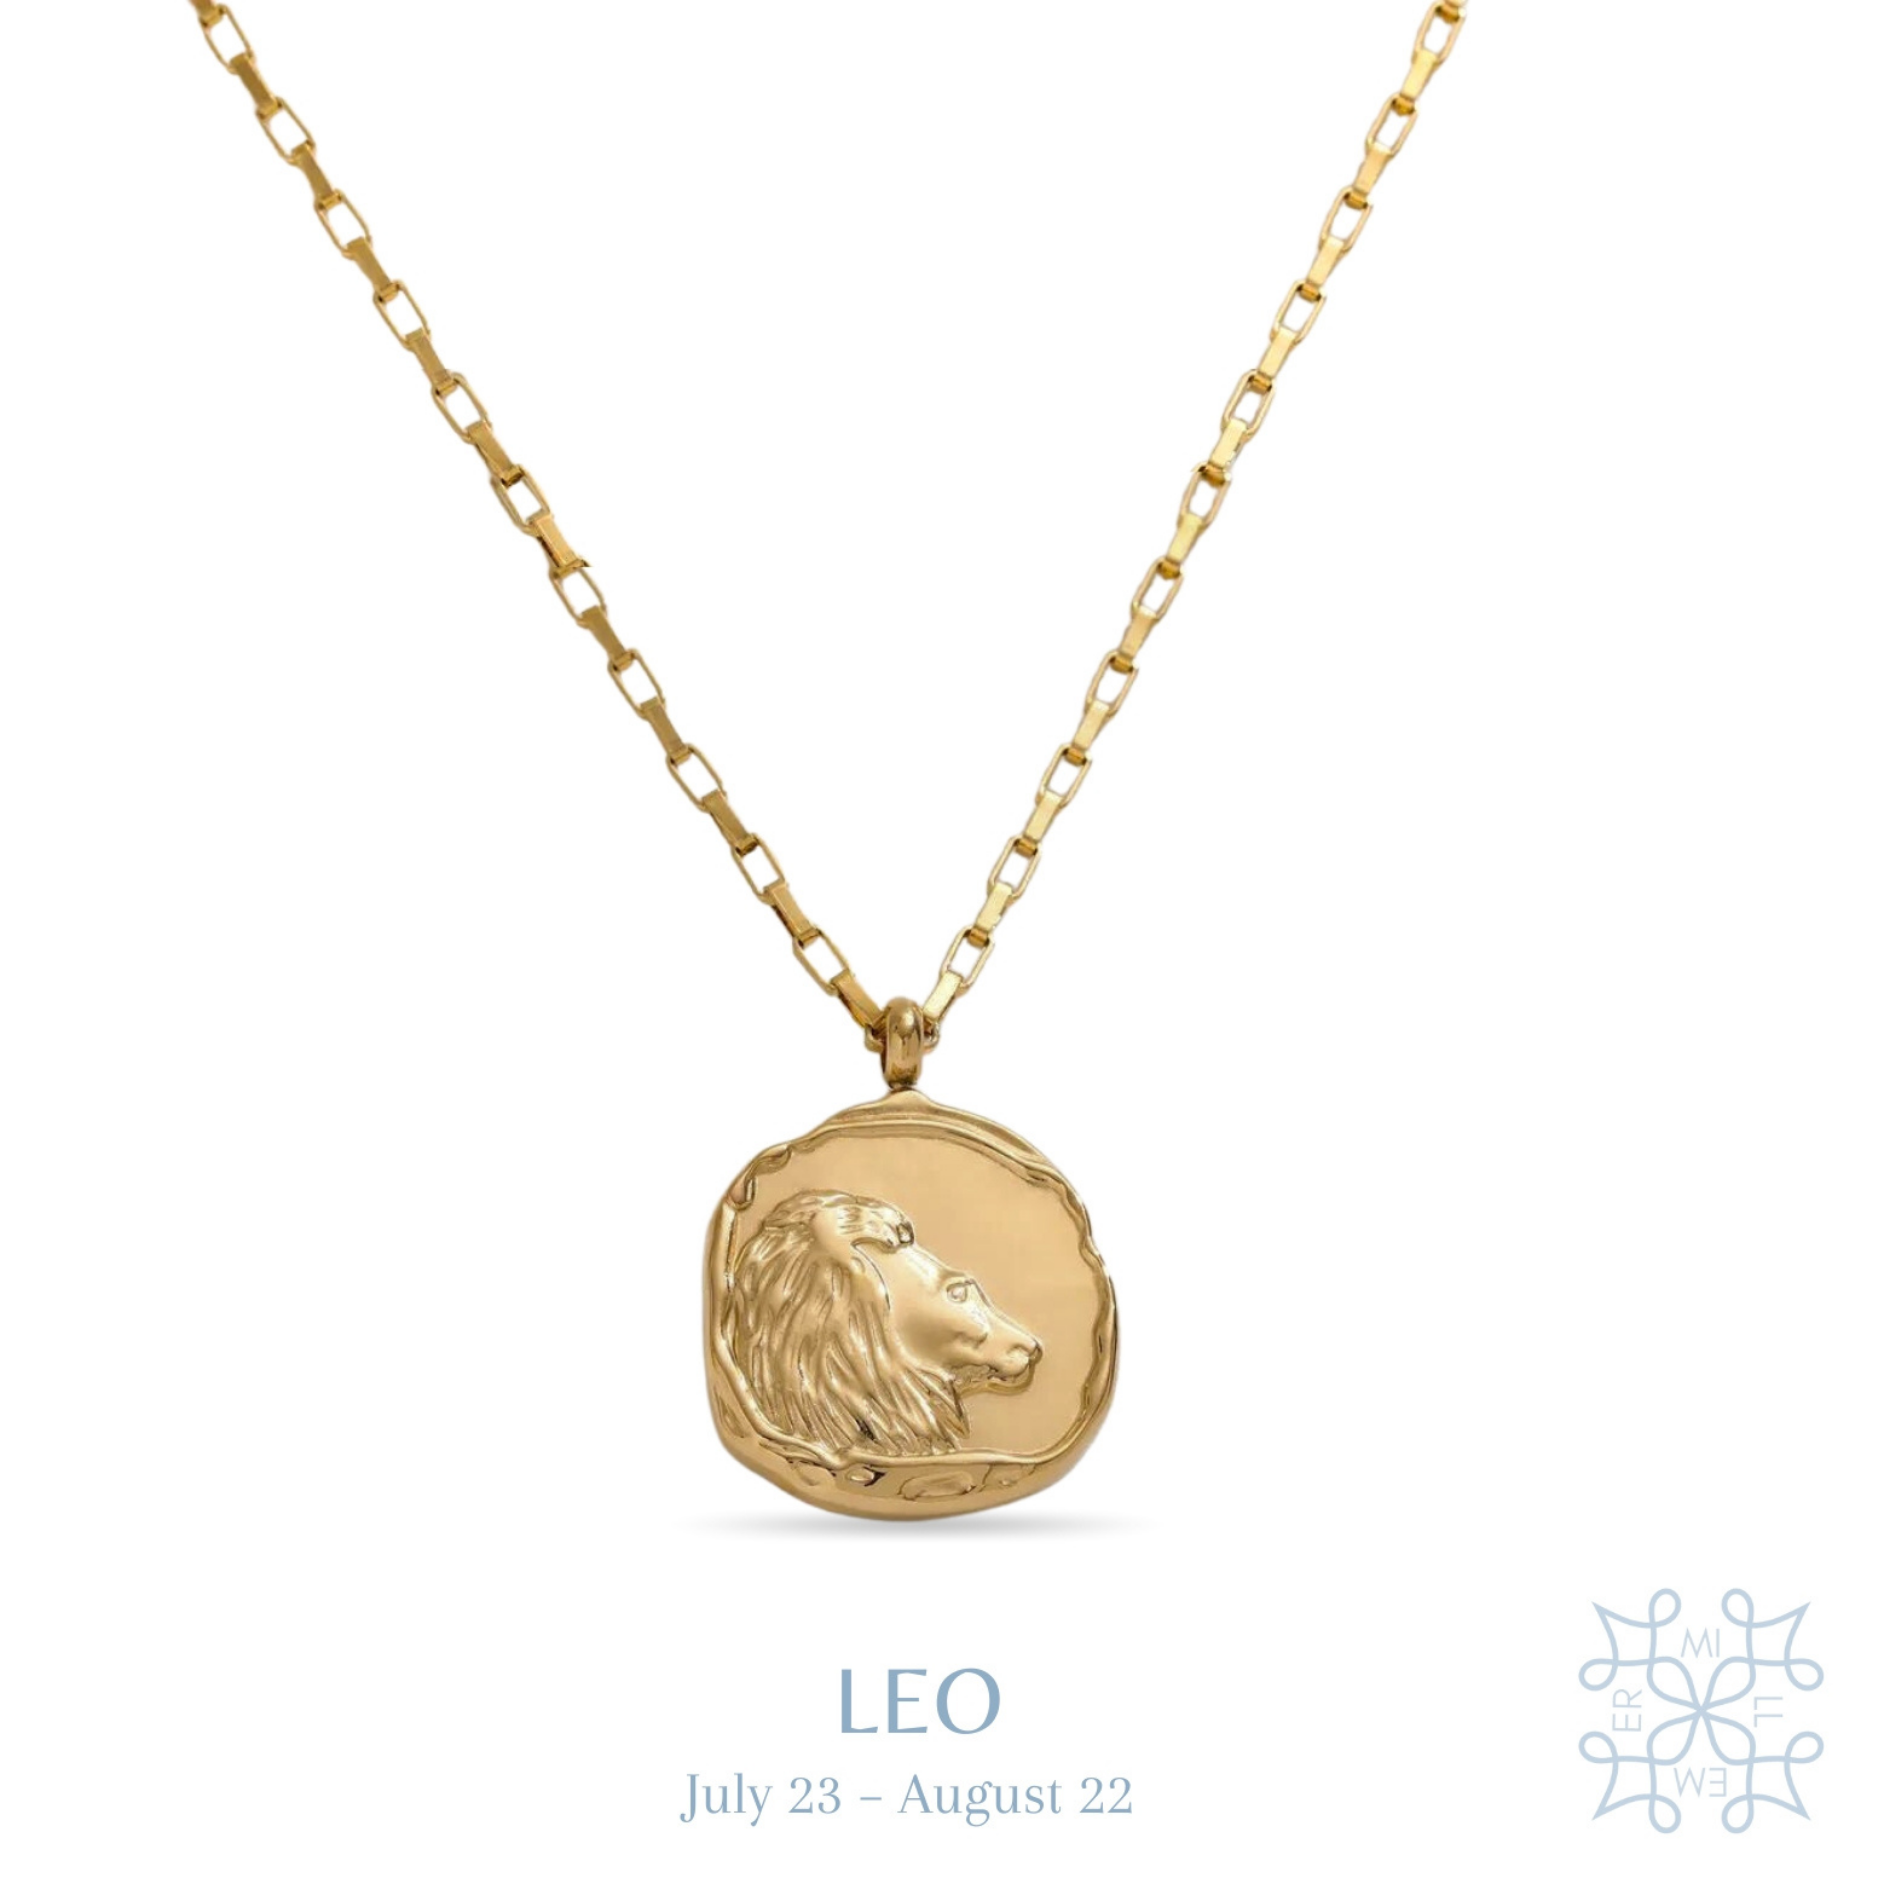 Irregular shape round medallion with Leo symbol in the middle. Gold plated chain and medallion necklace. Leo medallion gold necklace.